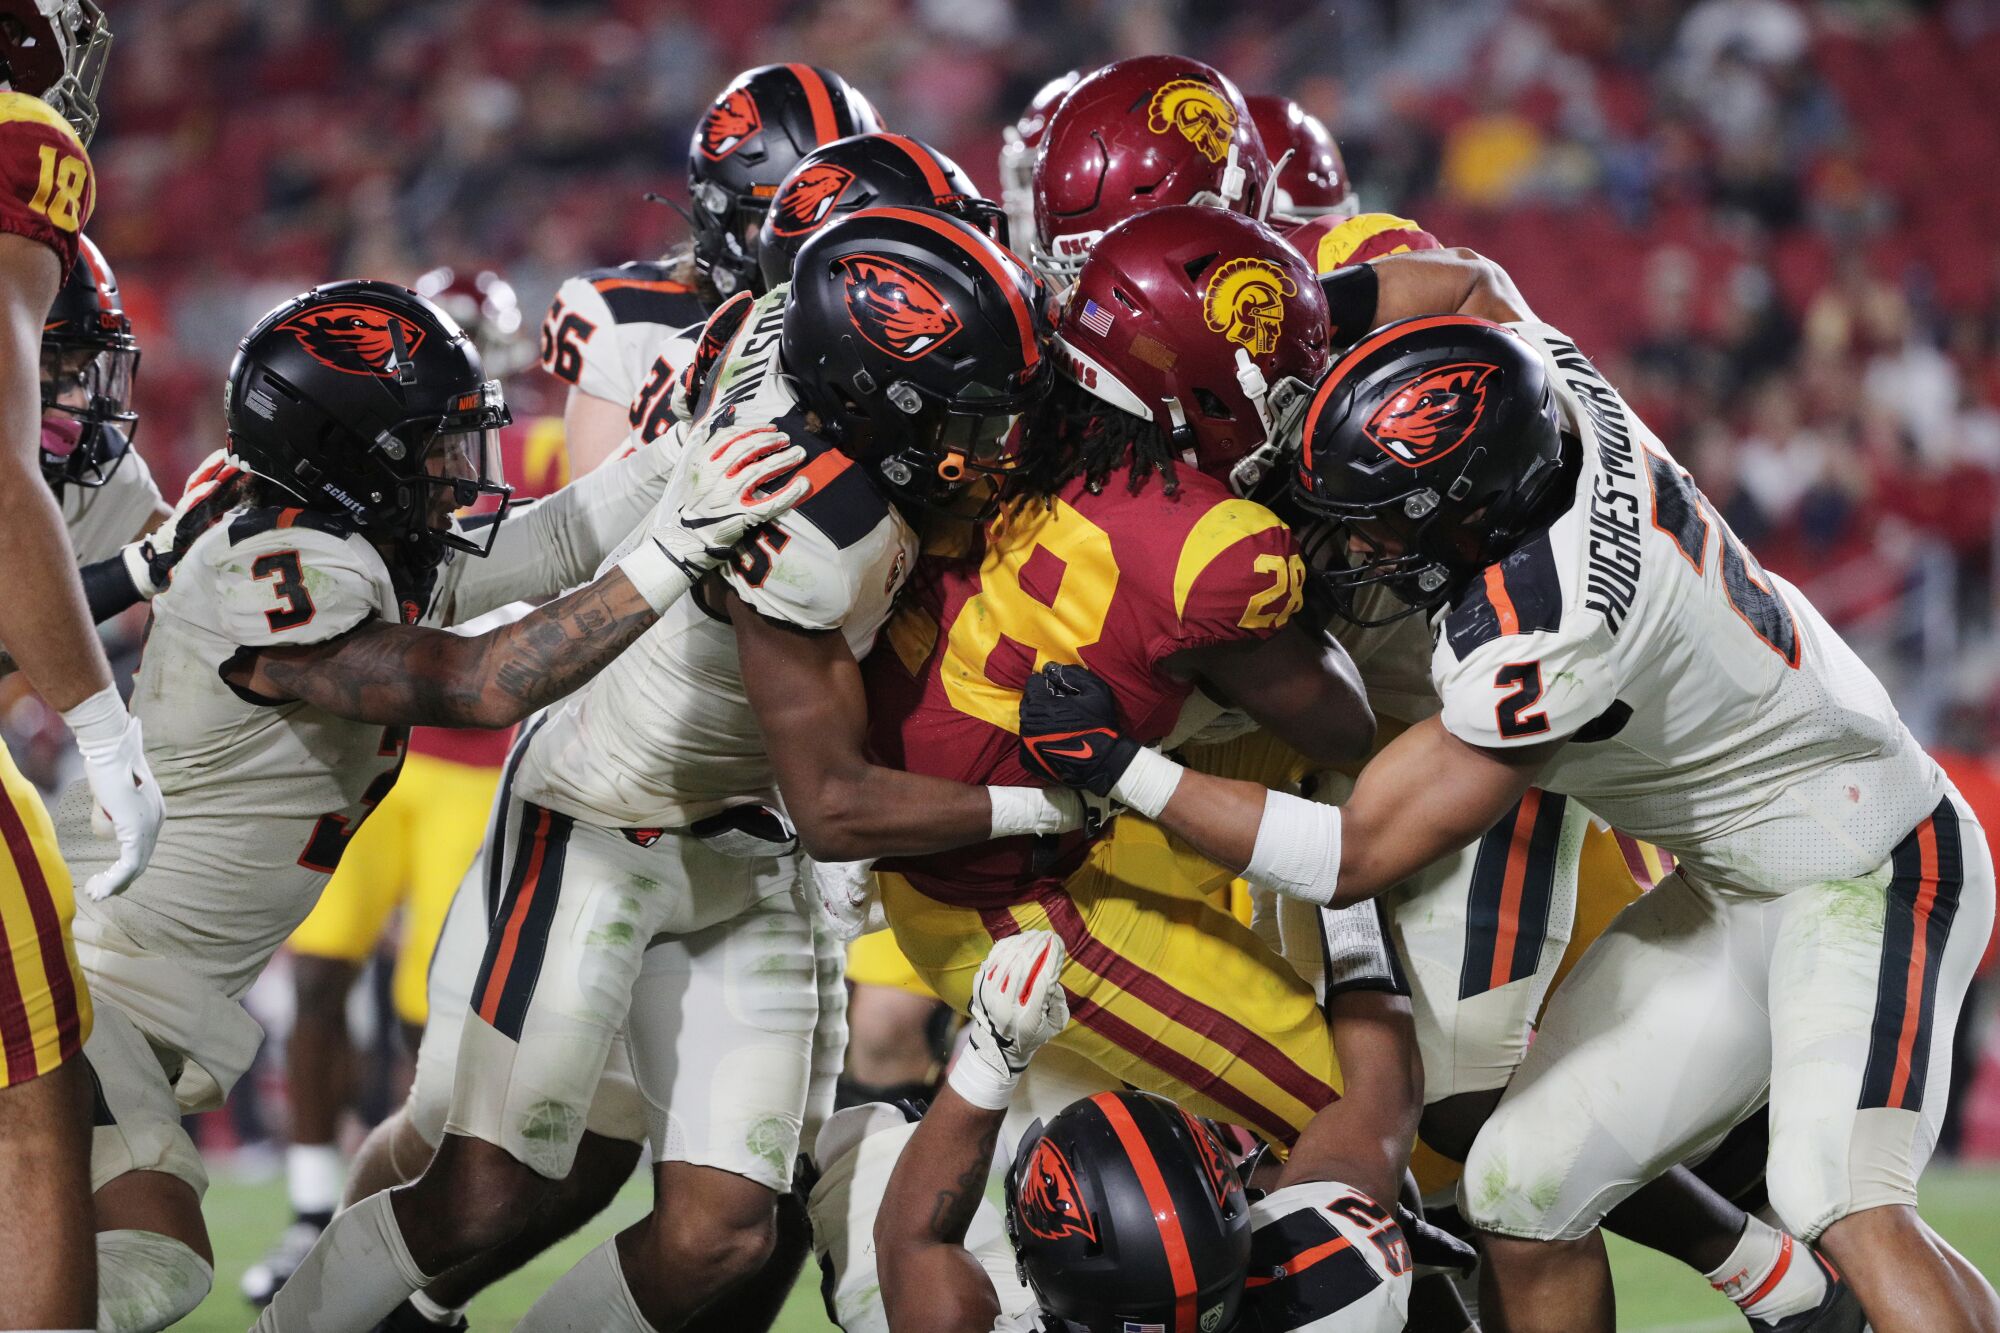 USC running back Keaontay Ingram is swarmed by the Oregon State defense in the second half Saturday.